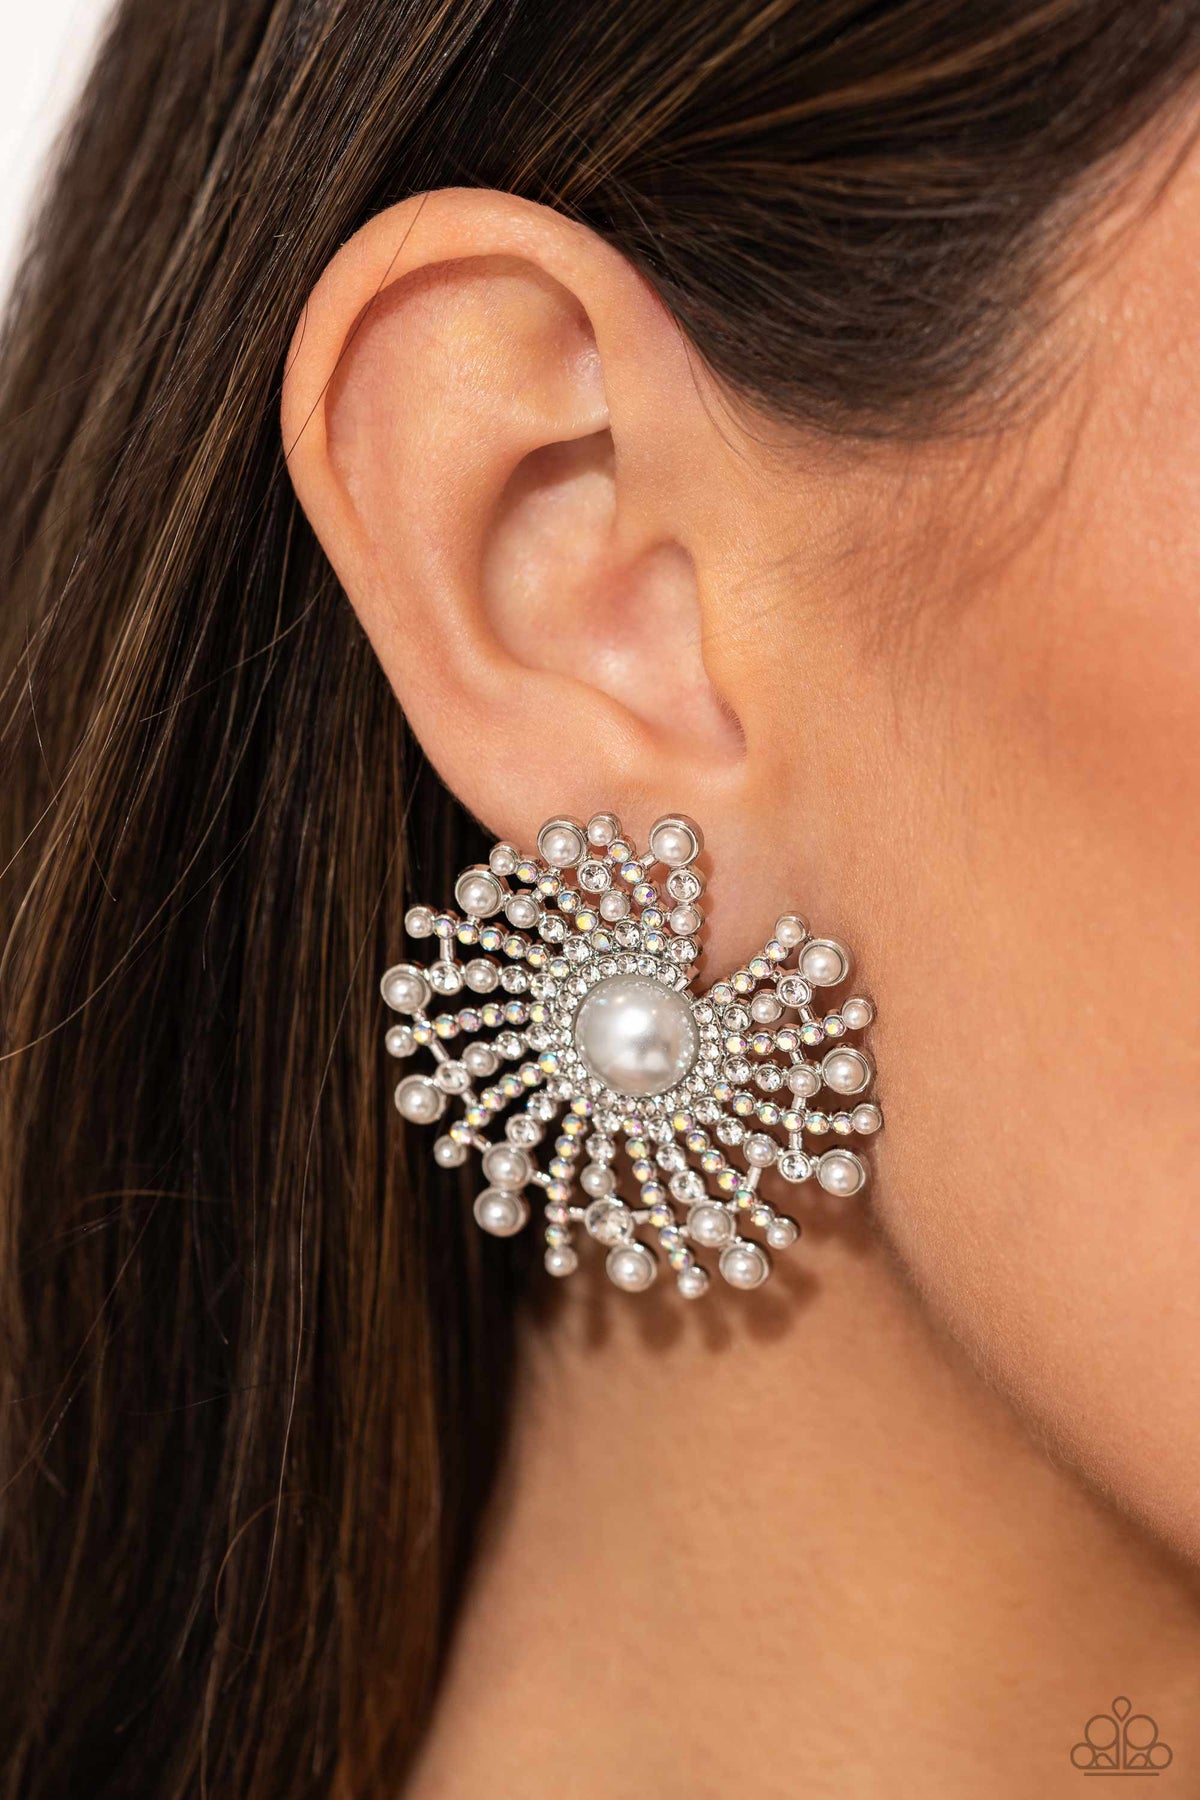 Fancy Fireworks White Pearl &amp; Rhinestone Earrings - Paparazzi Accessories-on model - CarasShop.com - $5 Jewelry by Cara Jewels